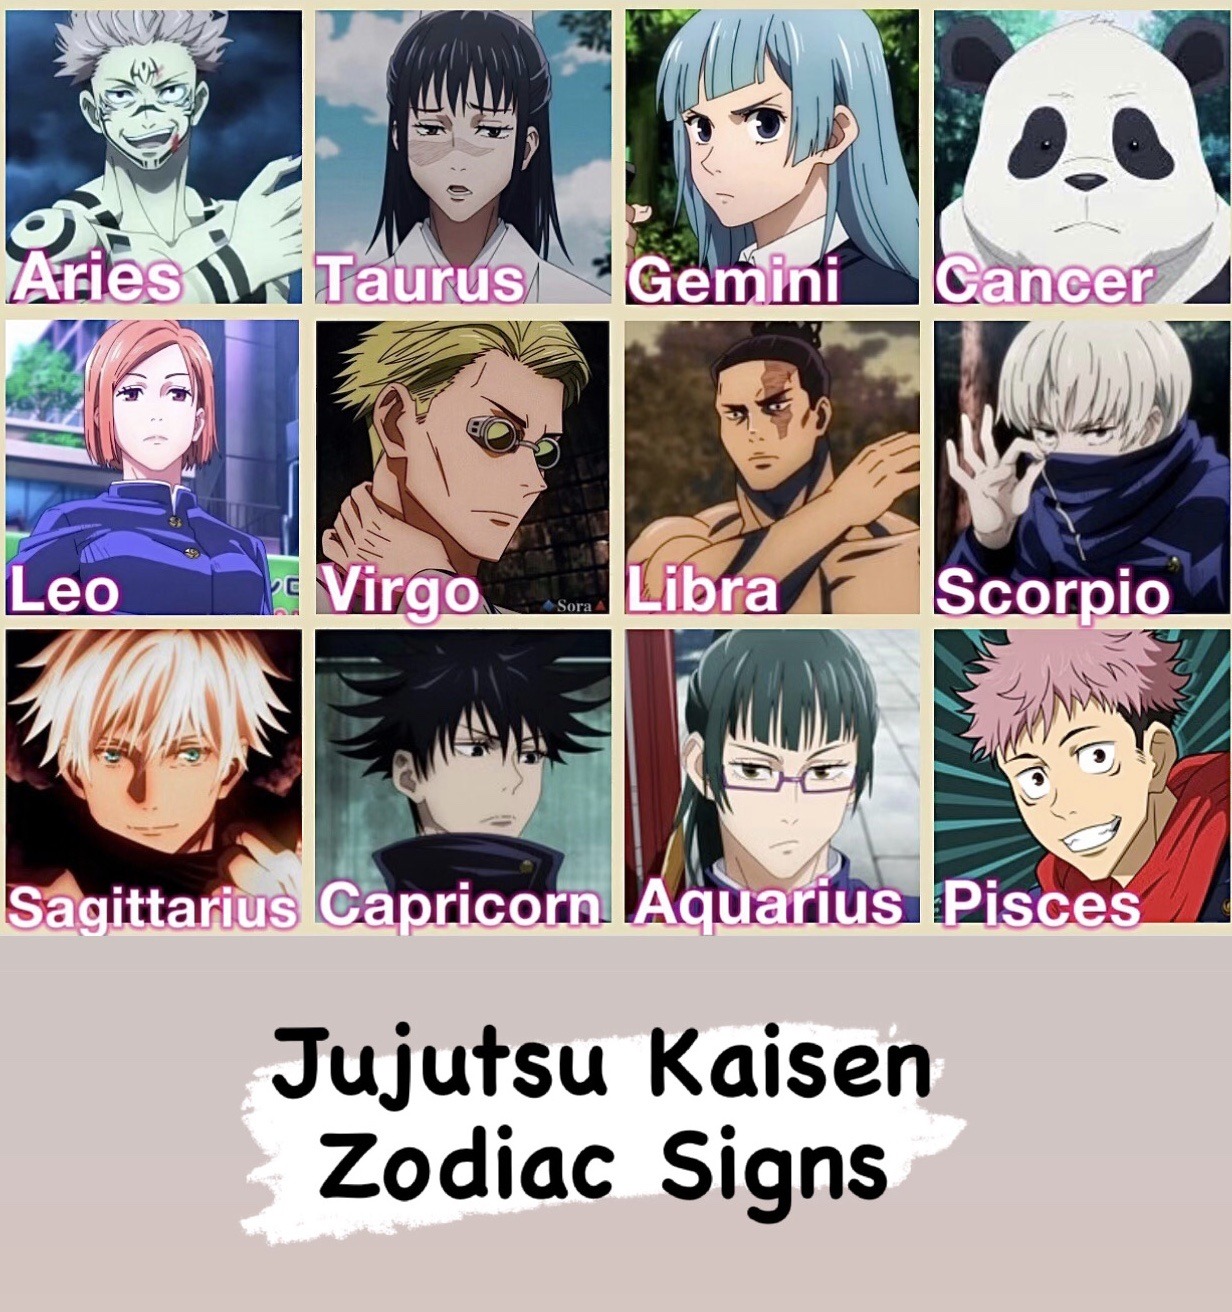 Which Naruto Character Are You Based On Your Zodiac